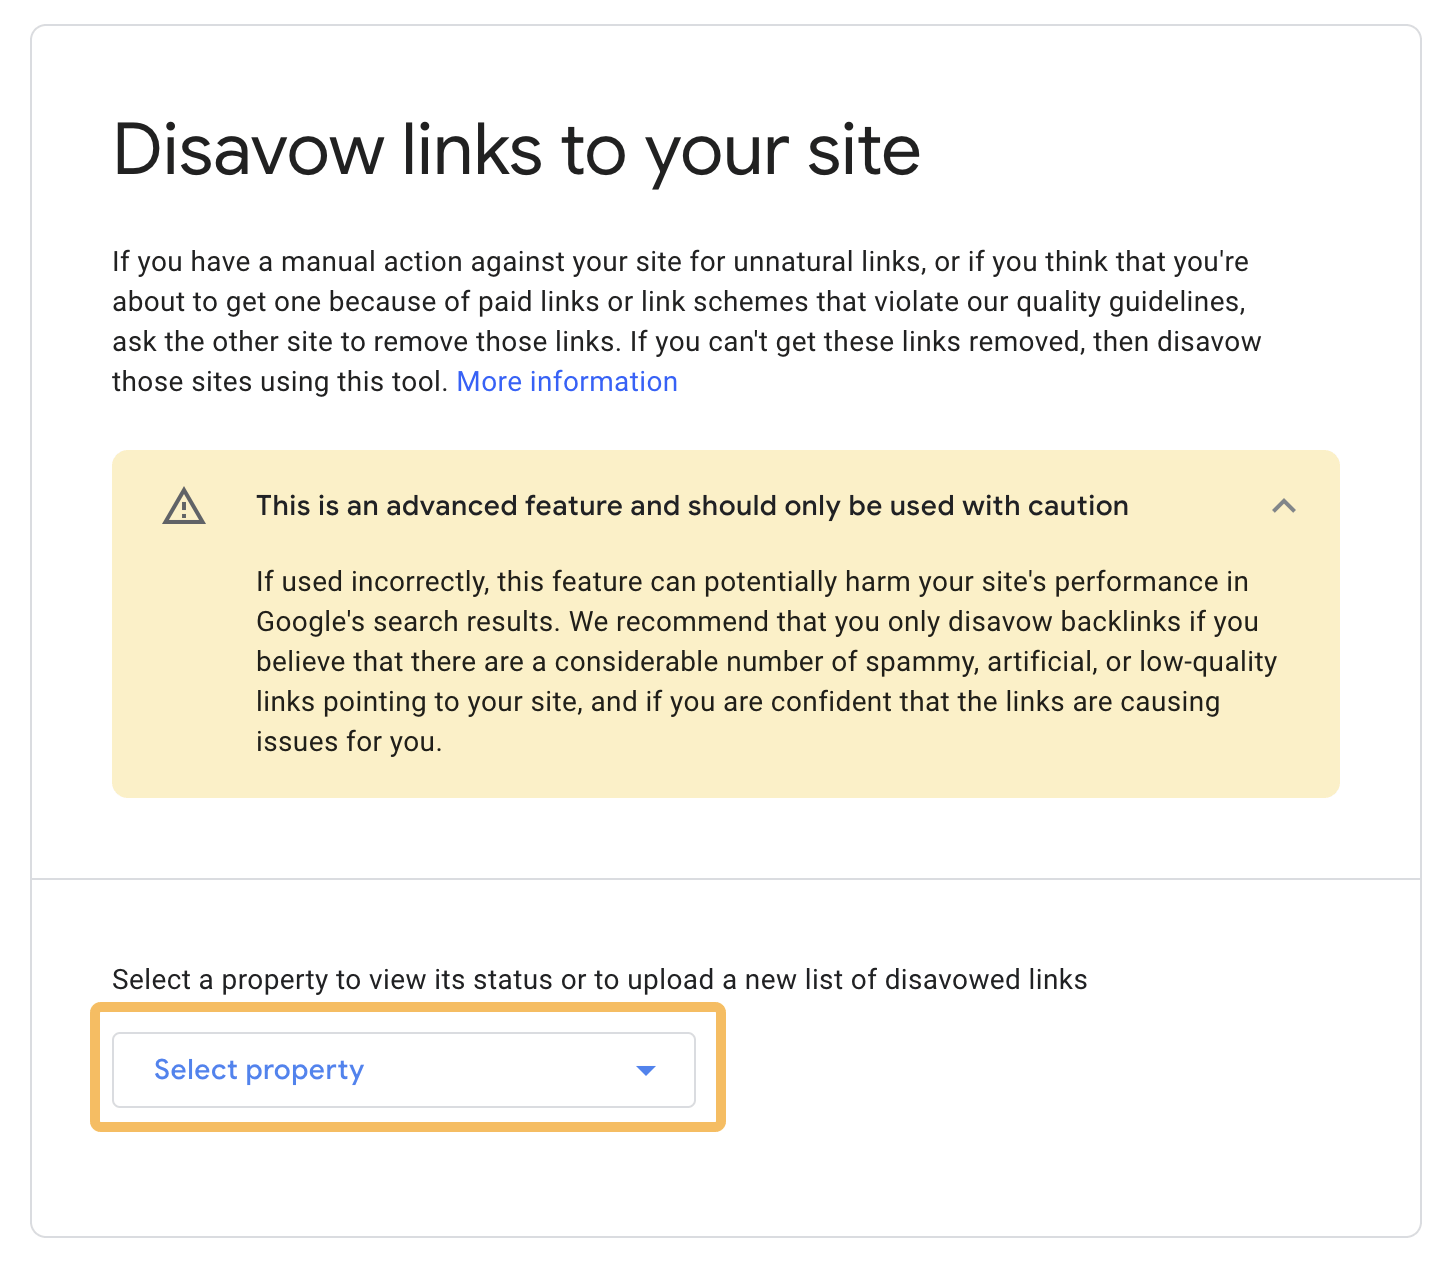 disavow-links-to-your-site